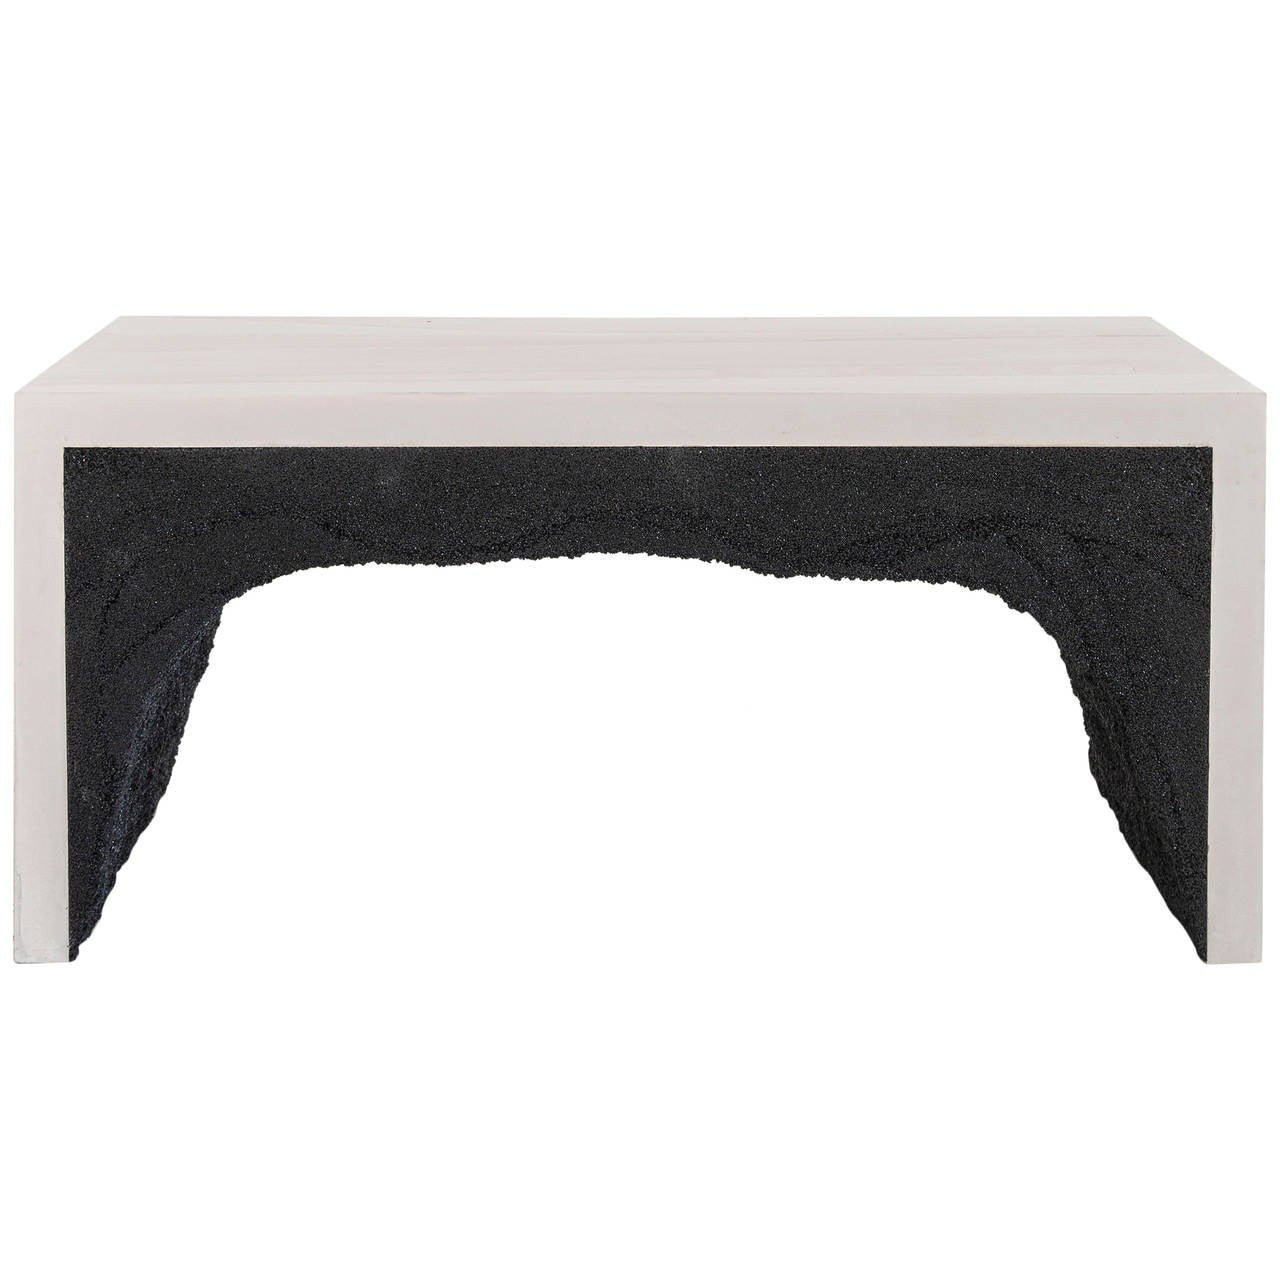 This bench consists of a hand-dyed white cement exterior and a black silica interior. The silica is packed by hand within the cement in an organic nature. 
Custom options available, please inquire with the studio.